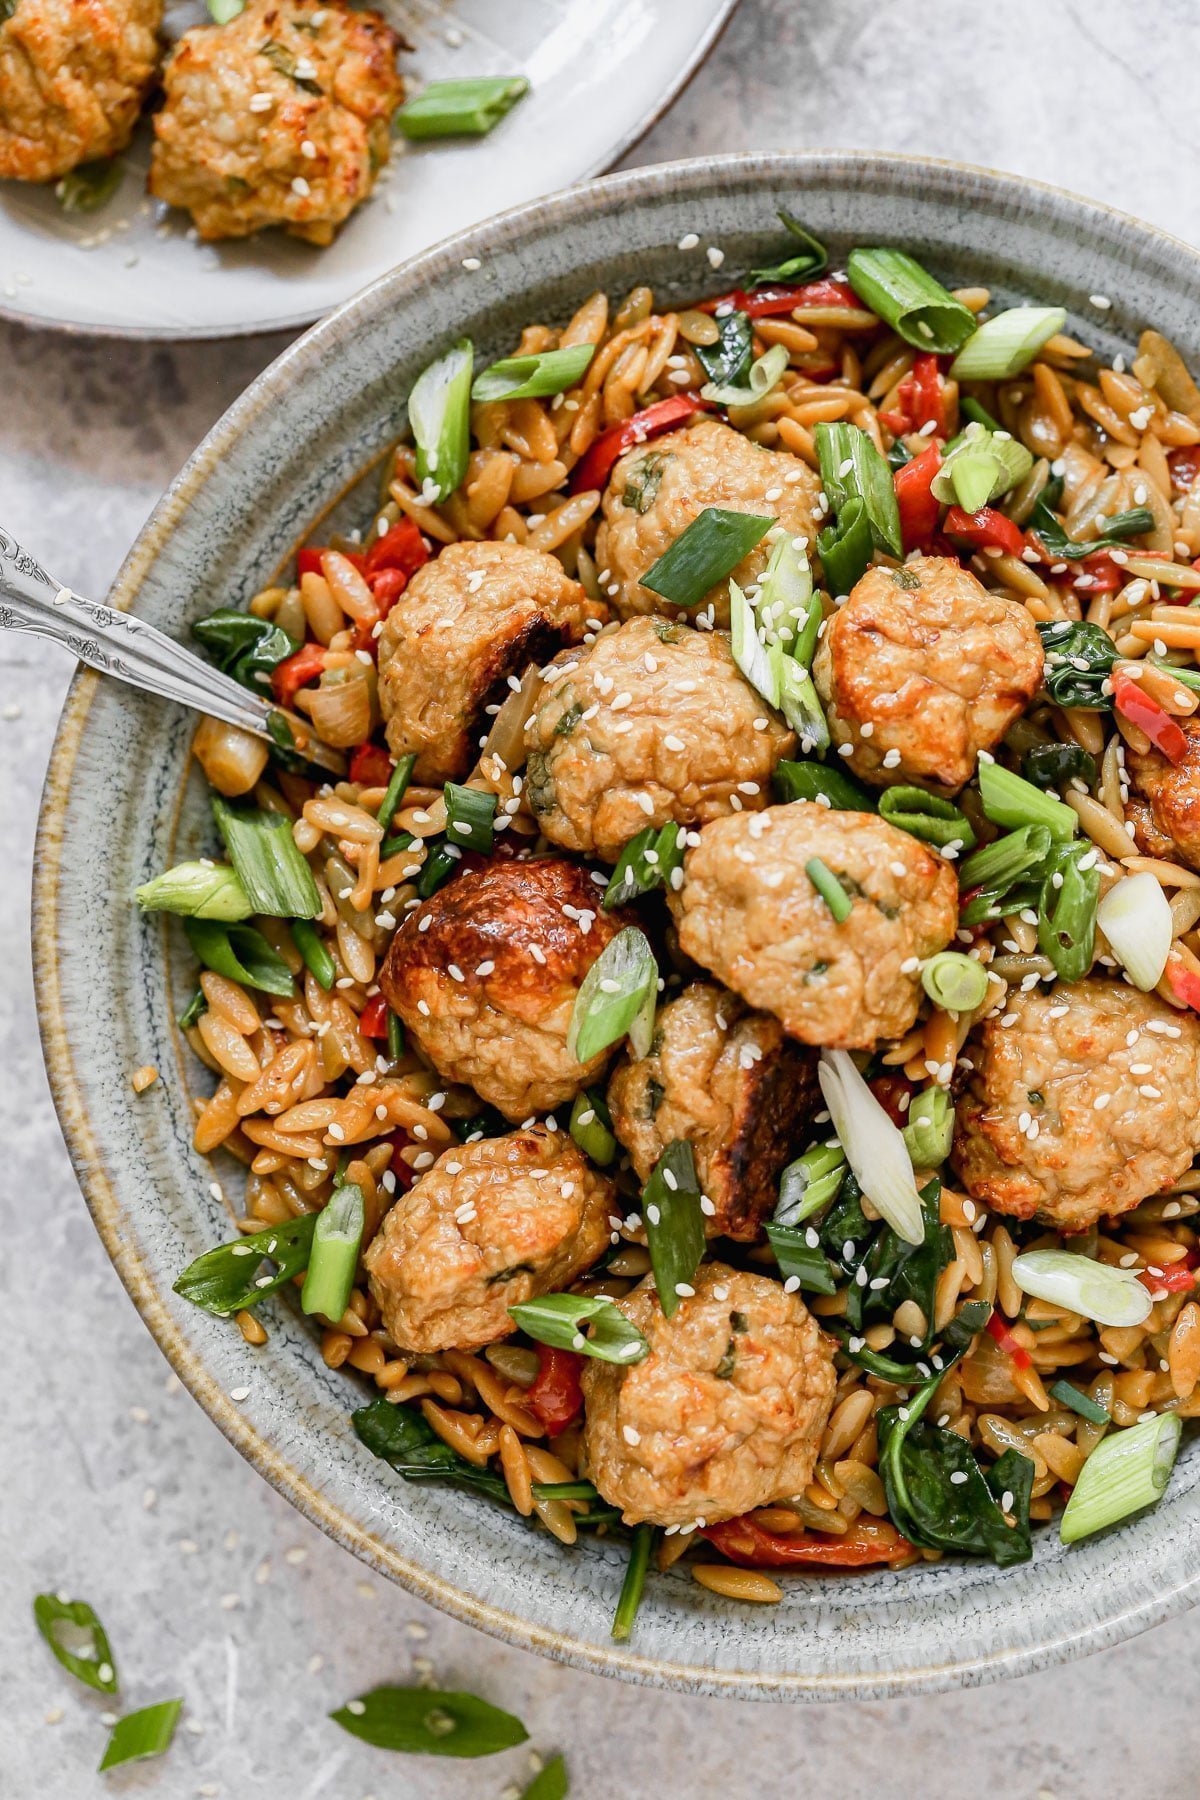 Our current favorite was to do meatballs: Asian Chicken Meatballs with Saucy Sesame and Hoisin Orzo. This fun spin on a classic pairs tender, garlic and ginger BAKED meatballs with an orzo full of veggies and an addictive sauce you'll want to lick with the a spoon. Prep ahead and eat later in the week!&nbsp;